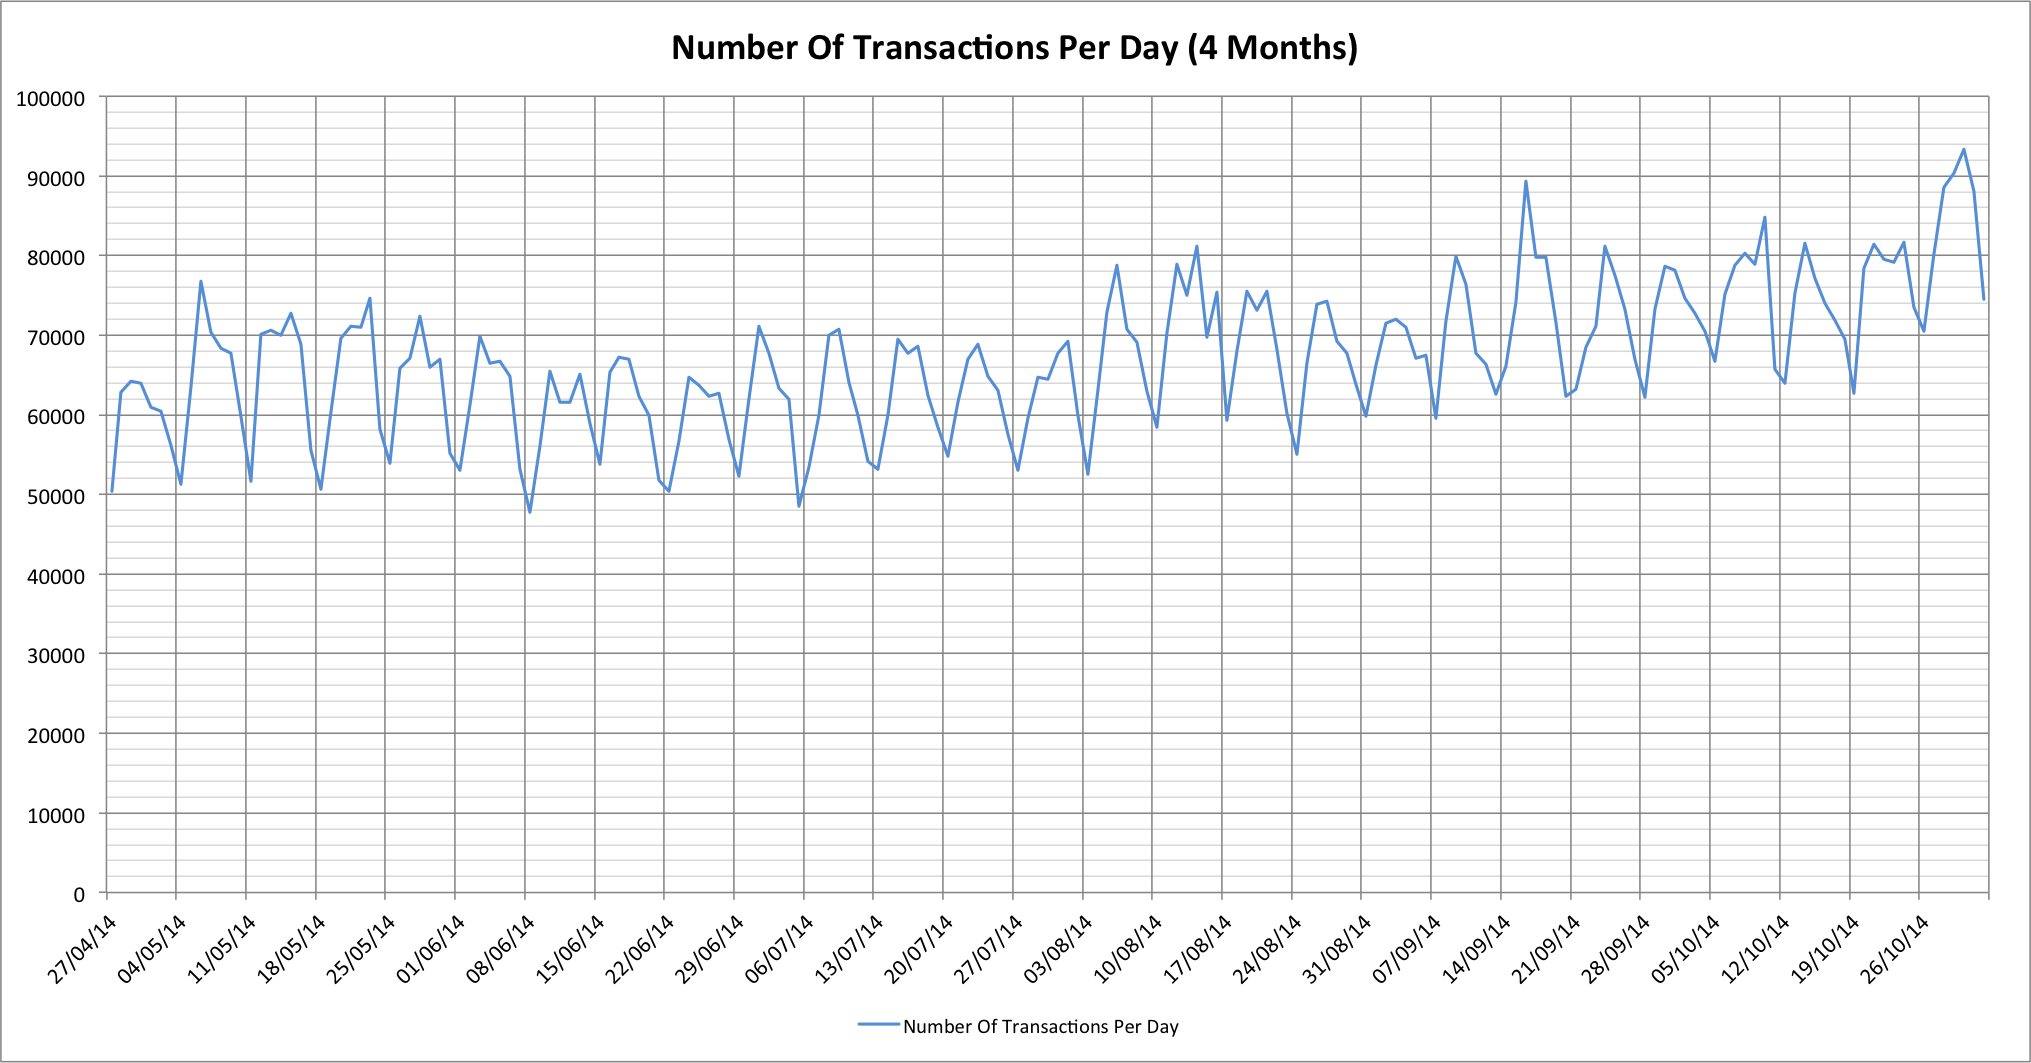 Periodic variations in the Bitcoin transaction processing rate with dips on Sundays